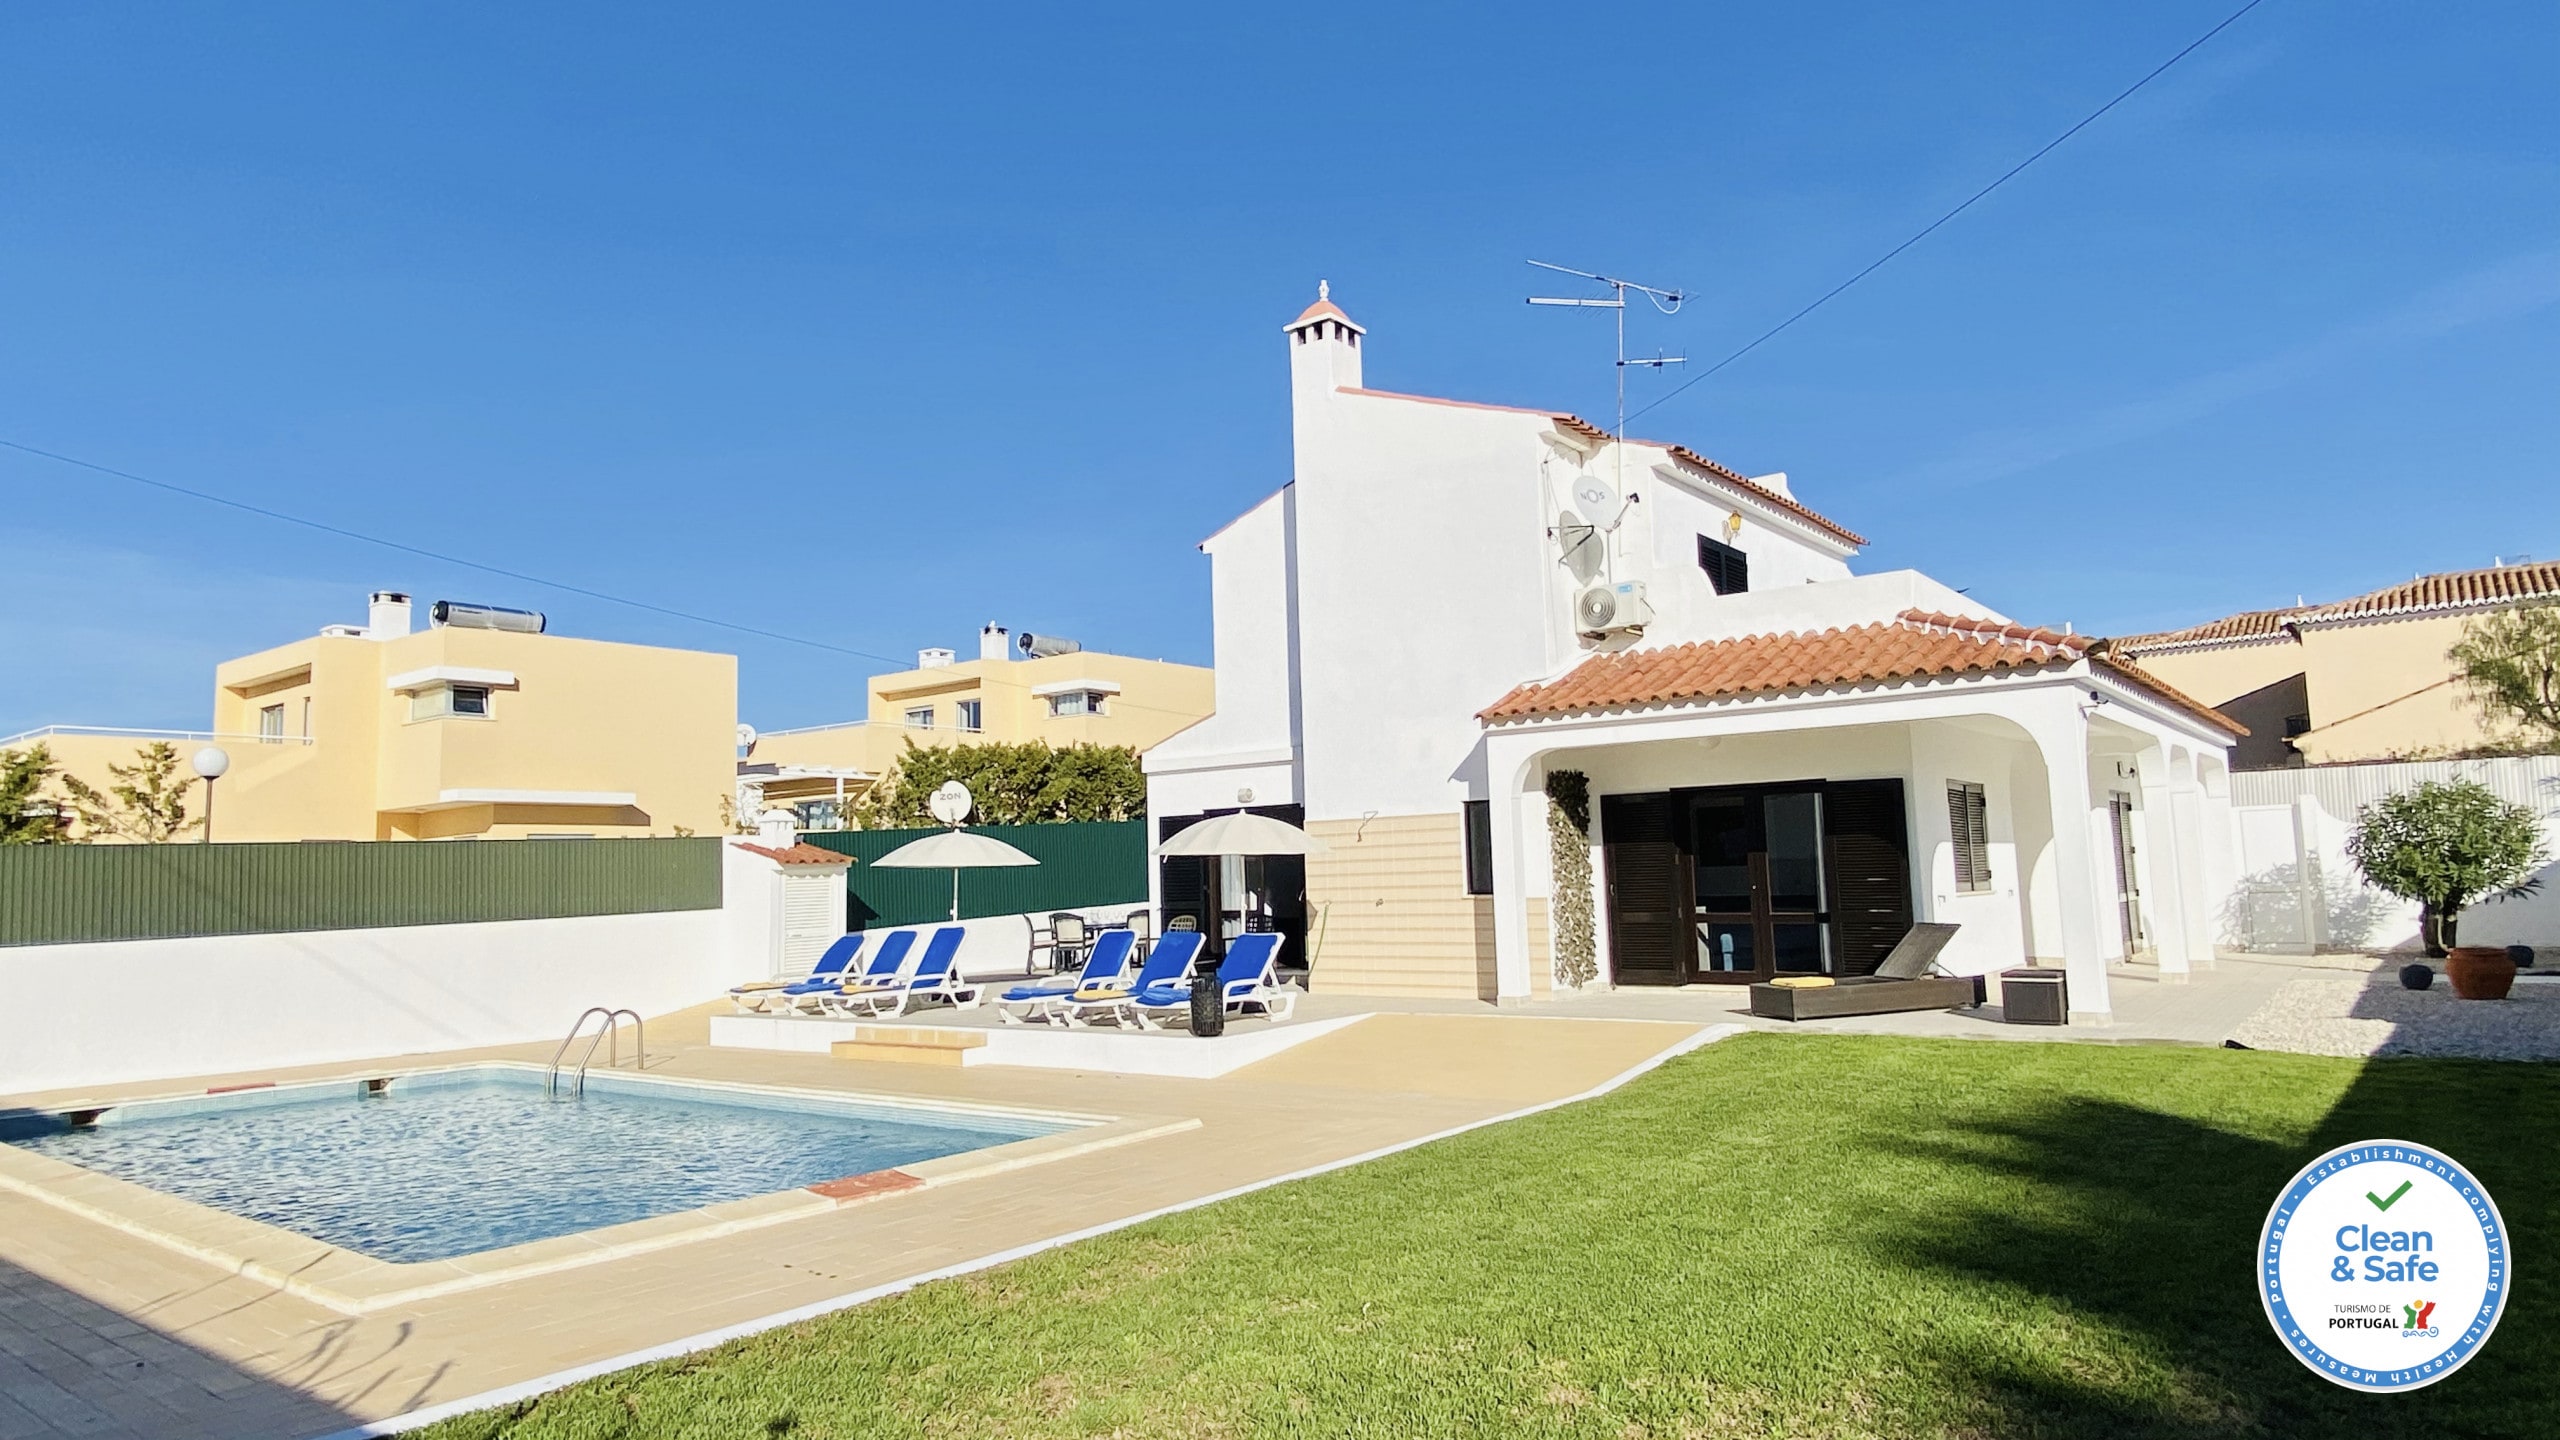 Property Image 1 - Fabulous Light Filled Villa with Lovely Terrace and BBQ